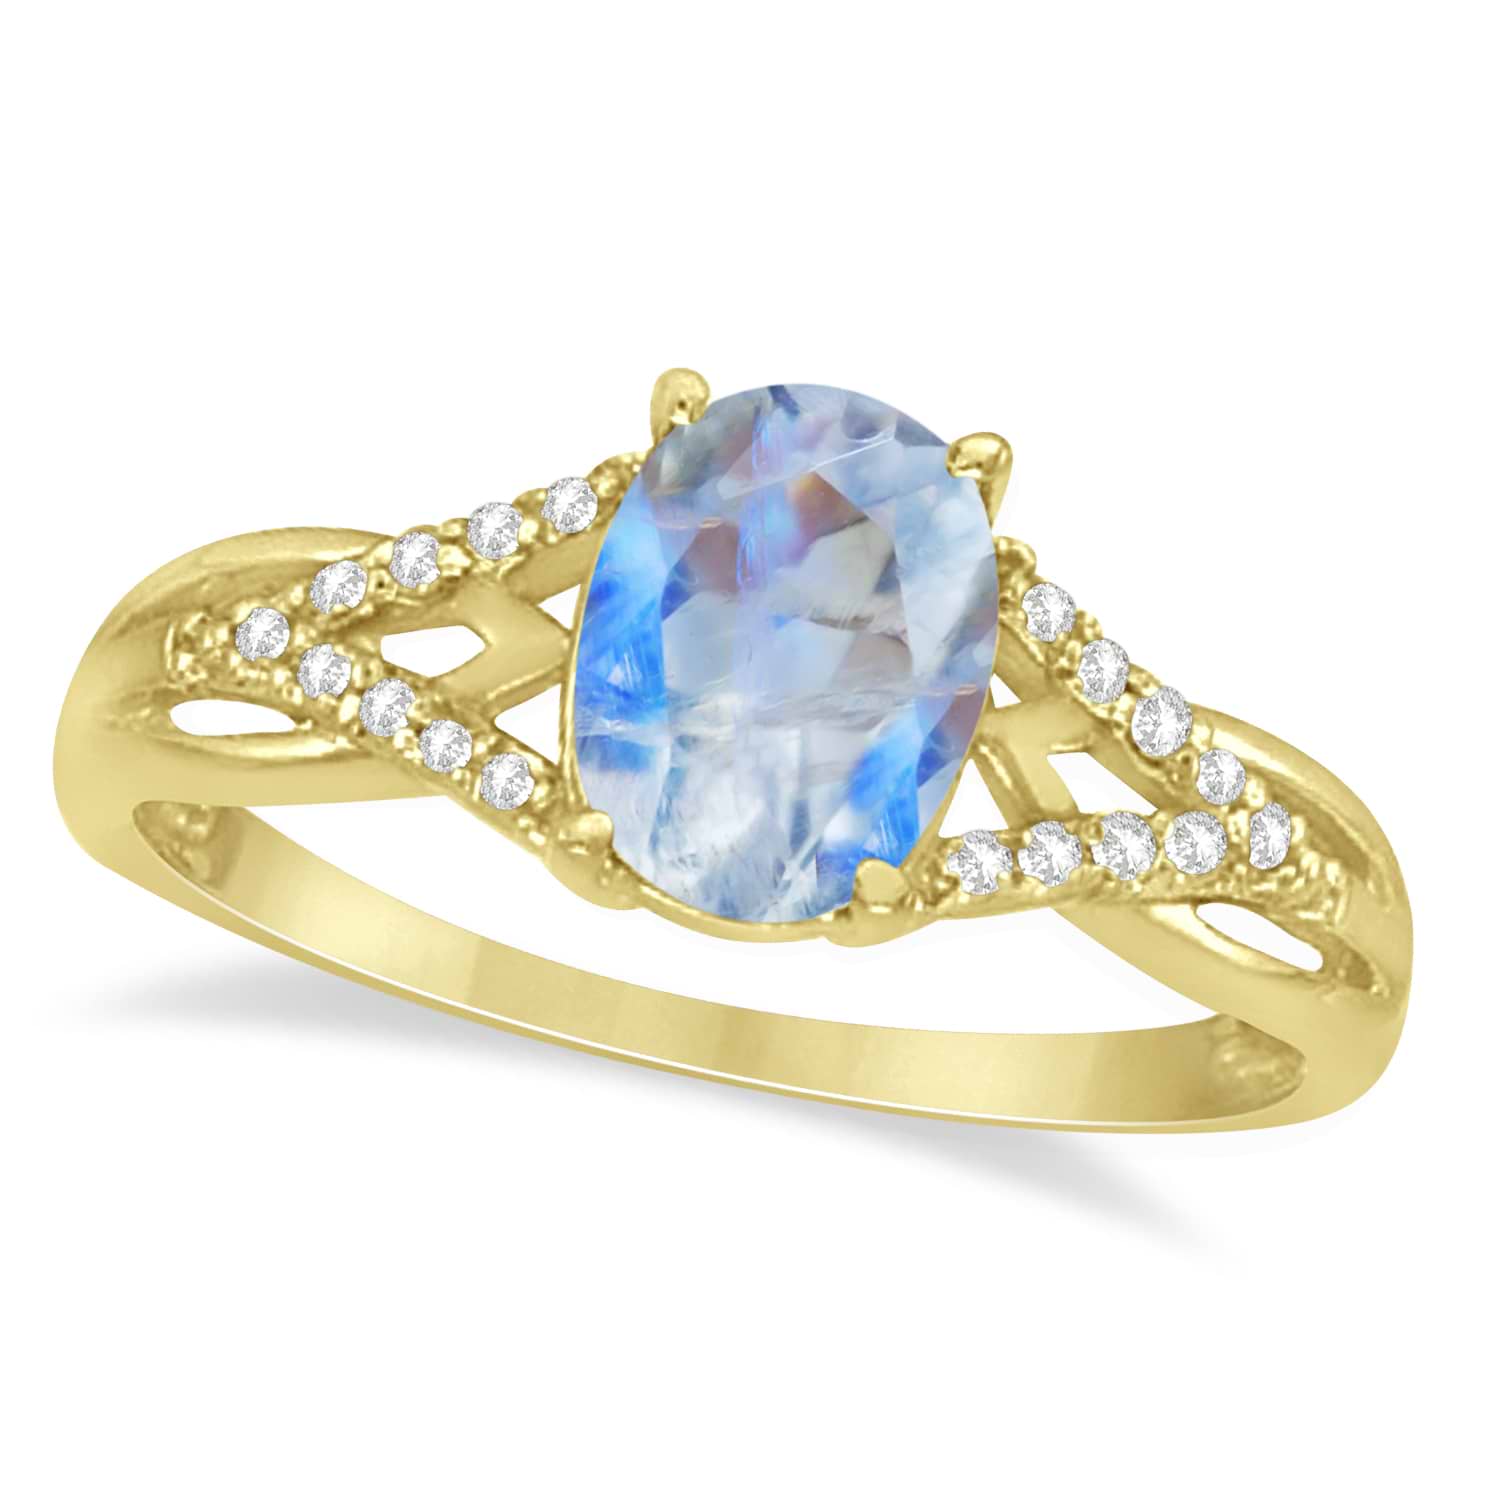 Oval Moonstone and Diamond Cocktail Ring 14K Yellow Gold (1.62tcw)